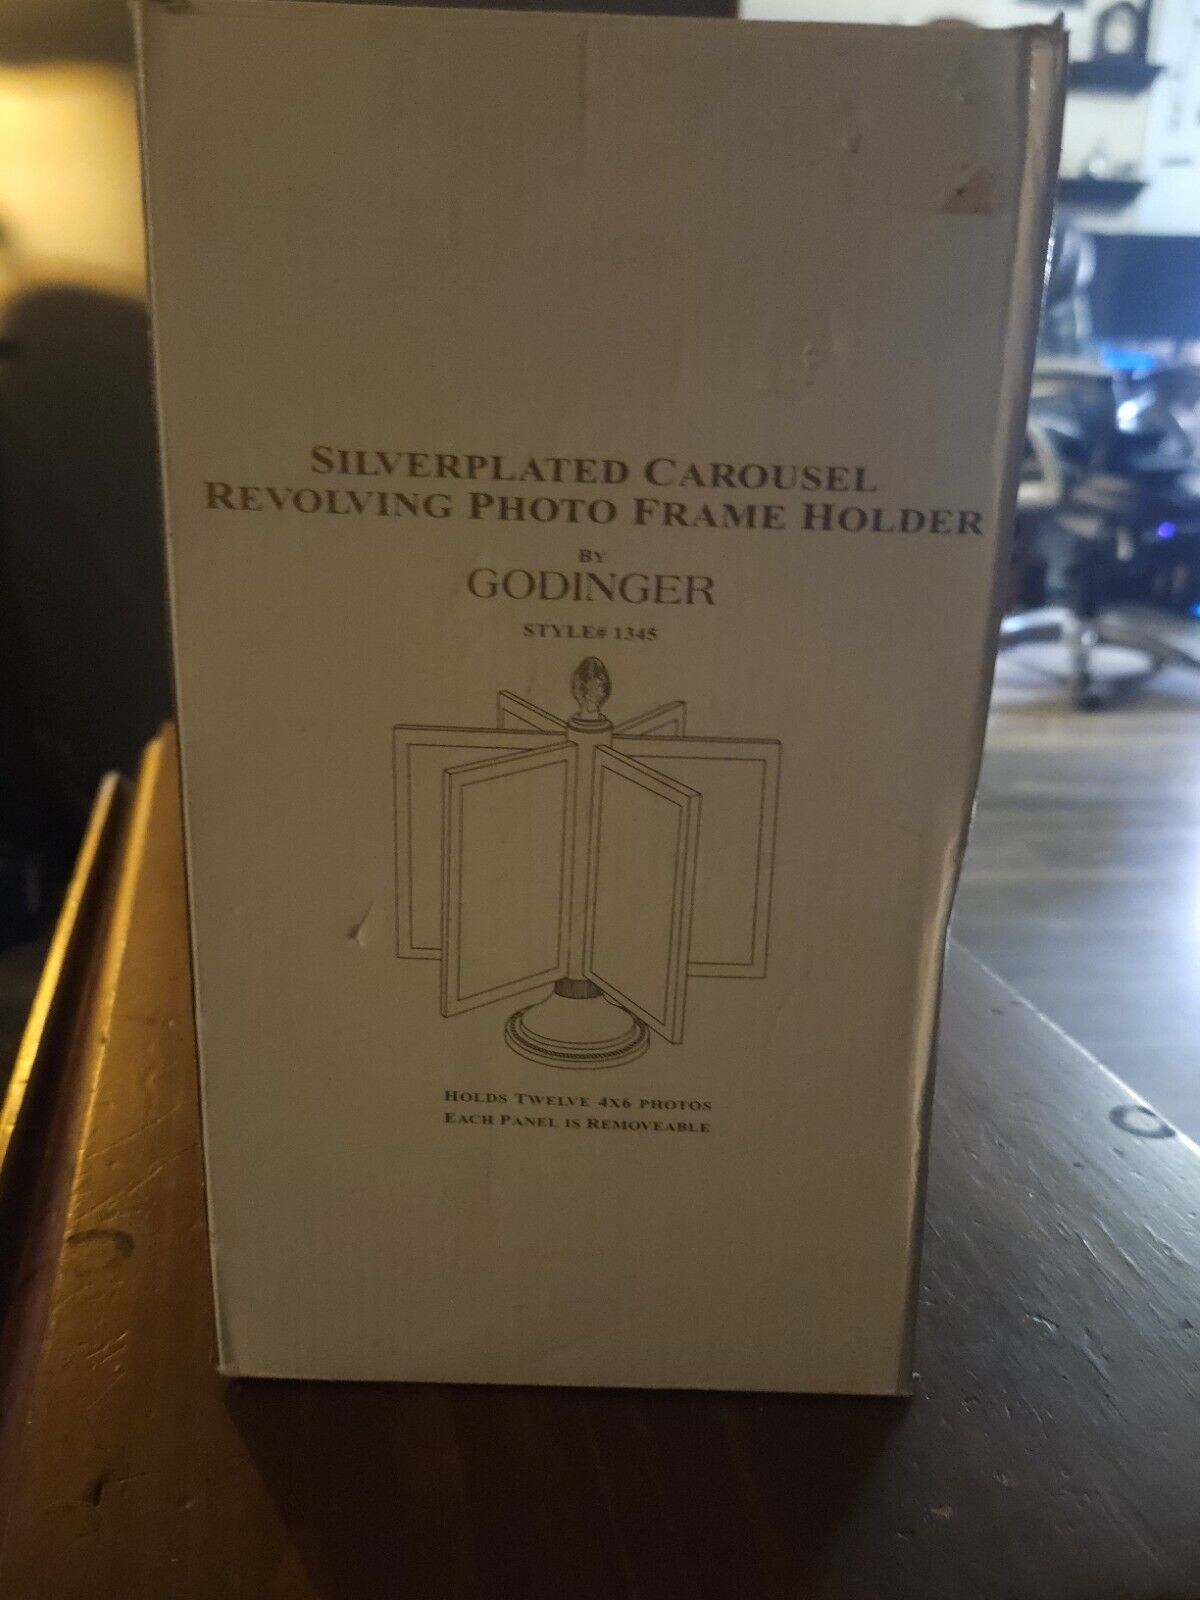 NEW in BOX GODINGER Silver Plated Carousel Revolving Photo Frame 12 4"x6" Photos